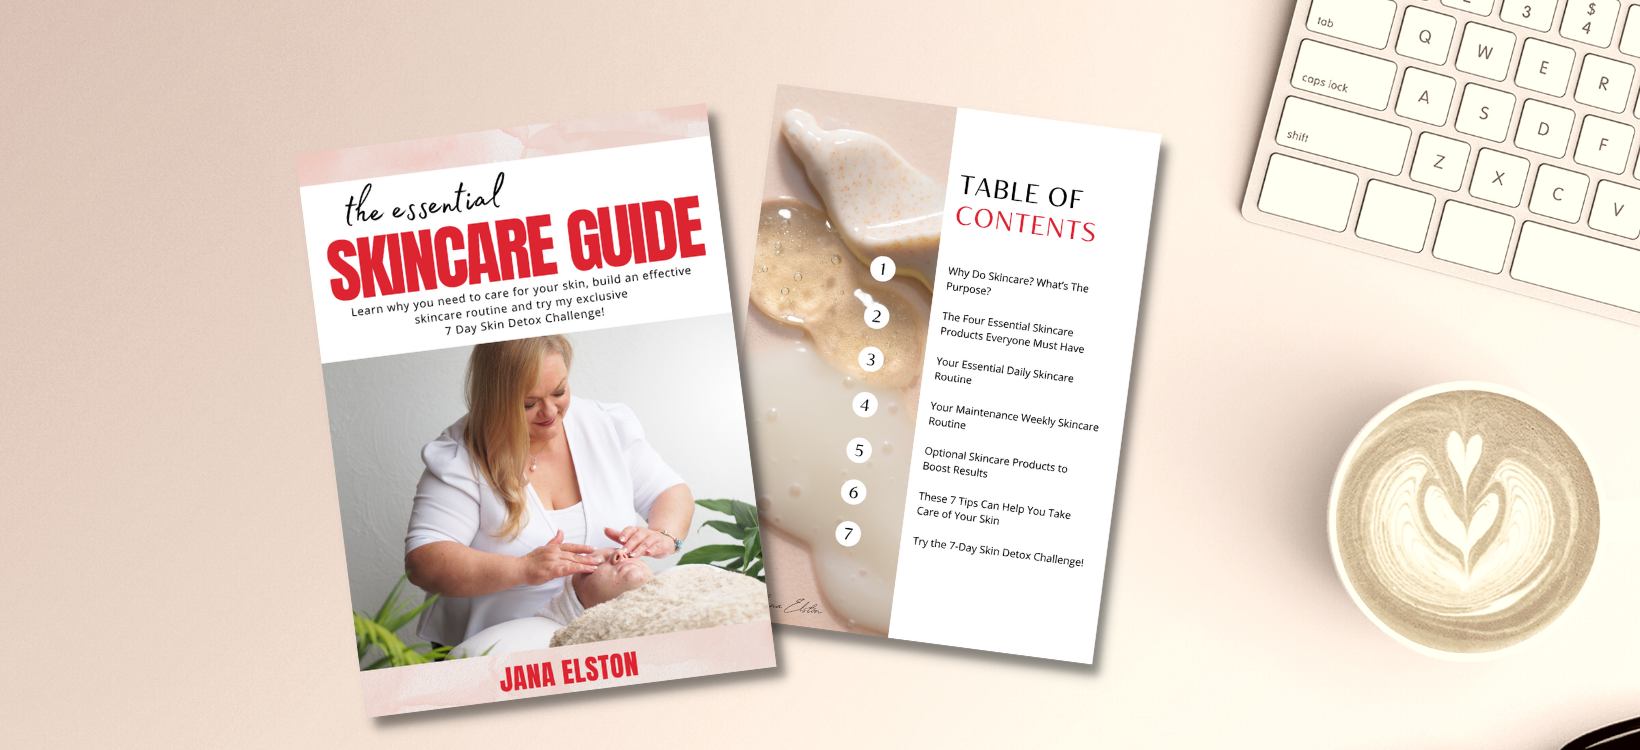 FREE The Essential Skincare Guide by Jana Elston